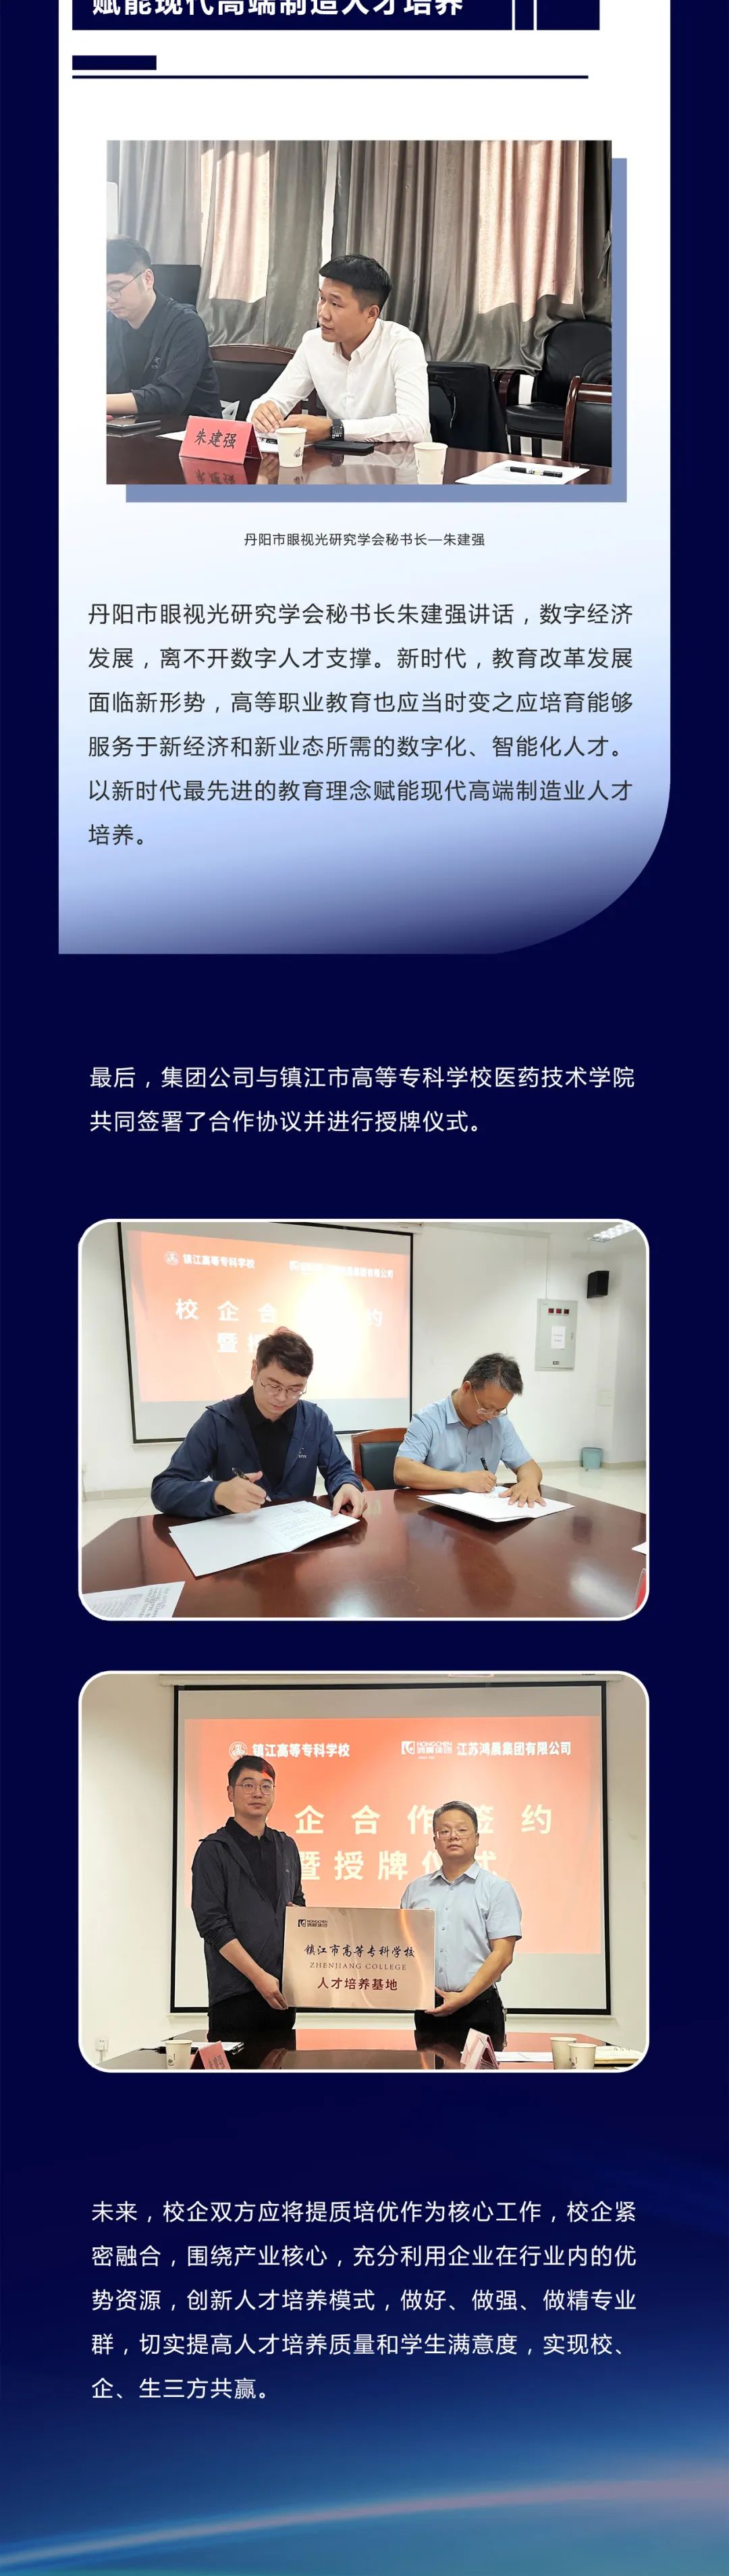 School-enterprise cooperation writes a new chapter | The signing ceremony of the professional school-enterprise cooperation between Hongchen Group and Zhenjiang College of Medical Technology (Optom...